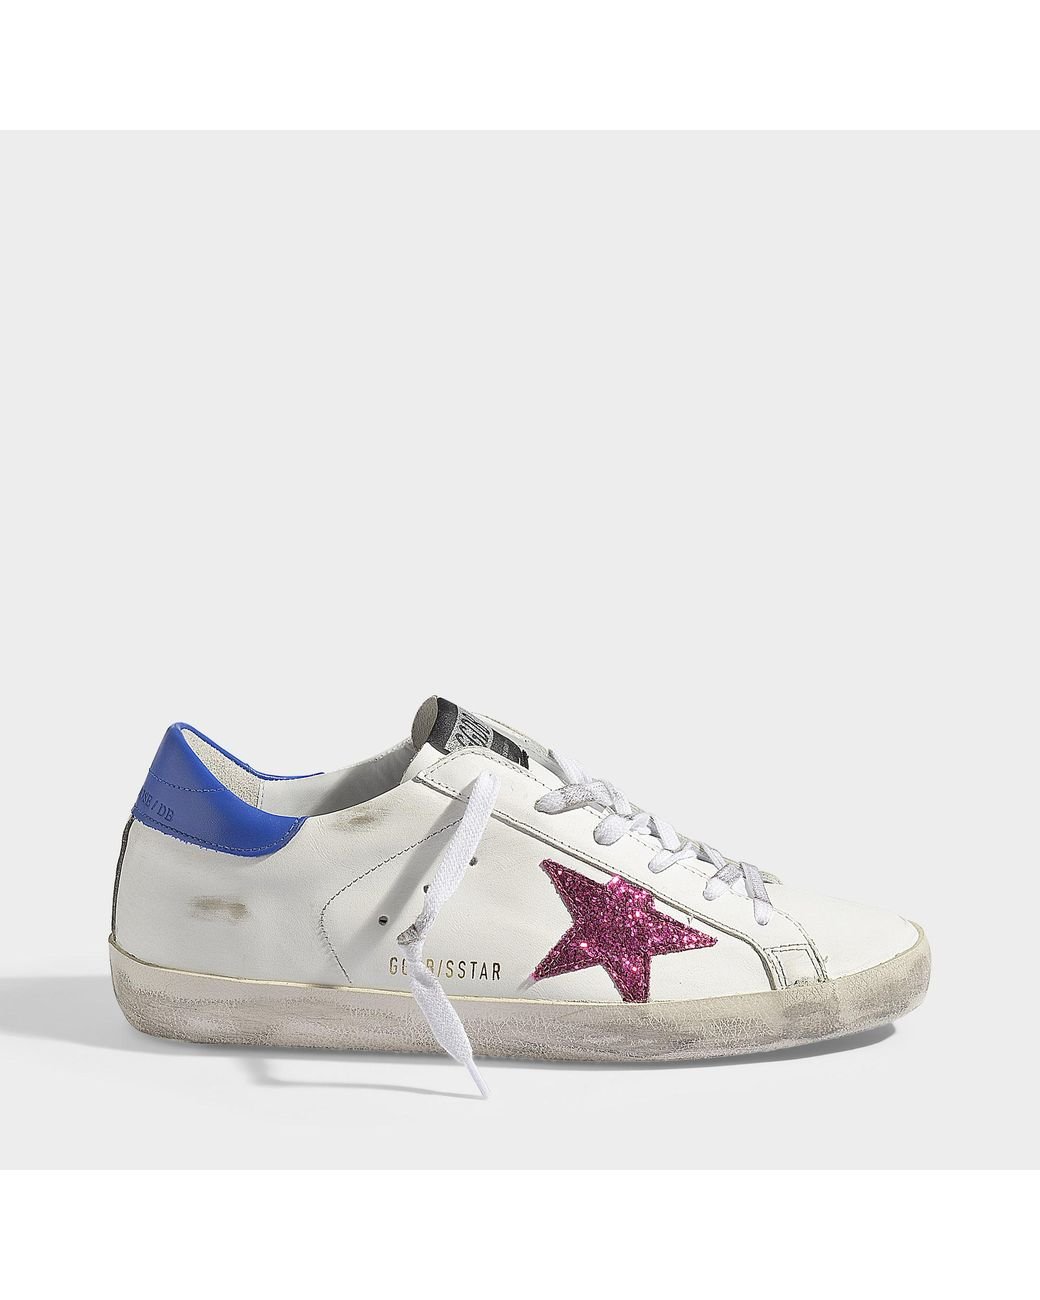 Golden Goose Superstar Sneakers In White, Cobalt Blue And Cherry Glitter  Smooth Calfskin | Lyst